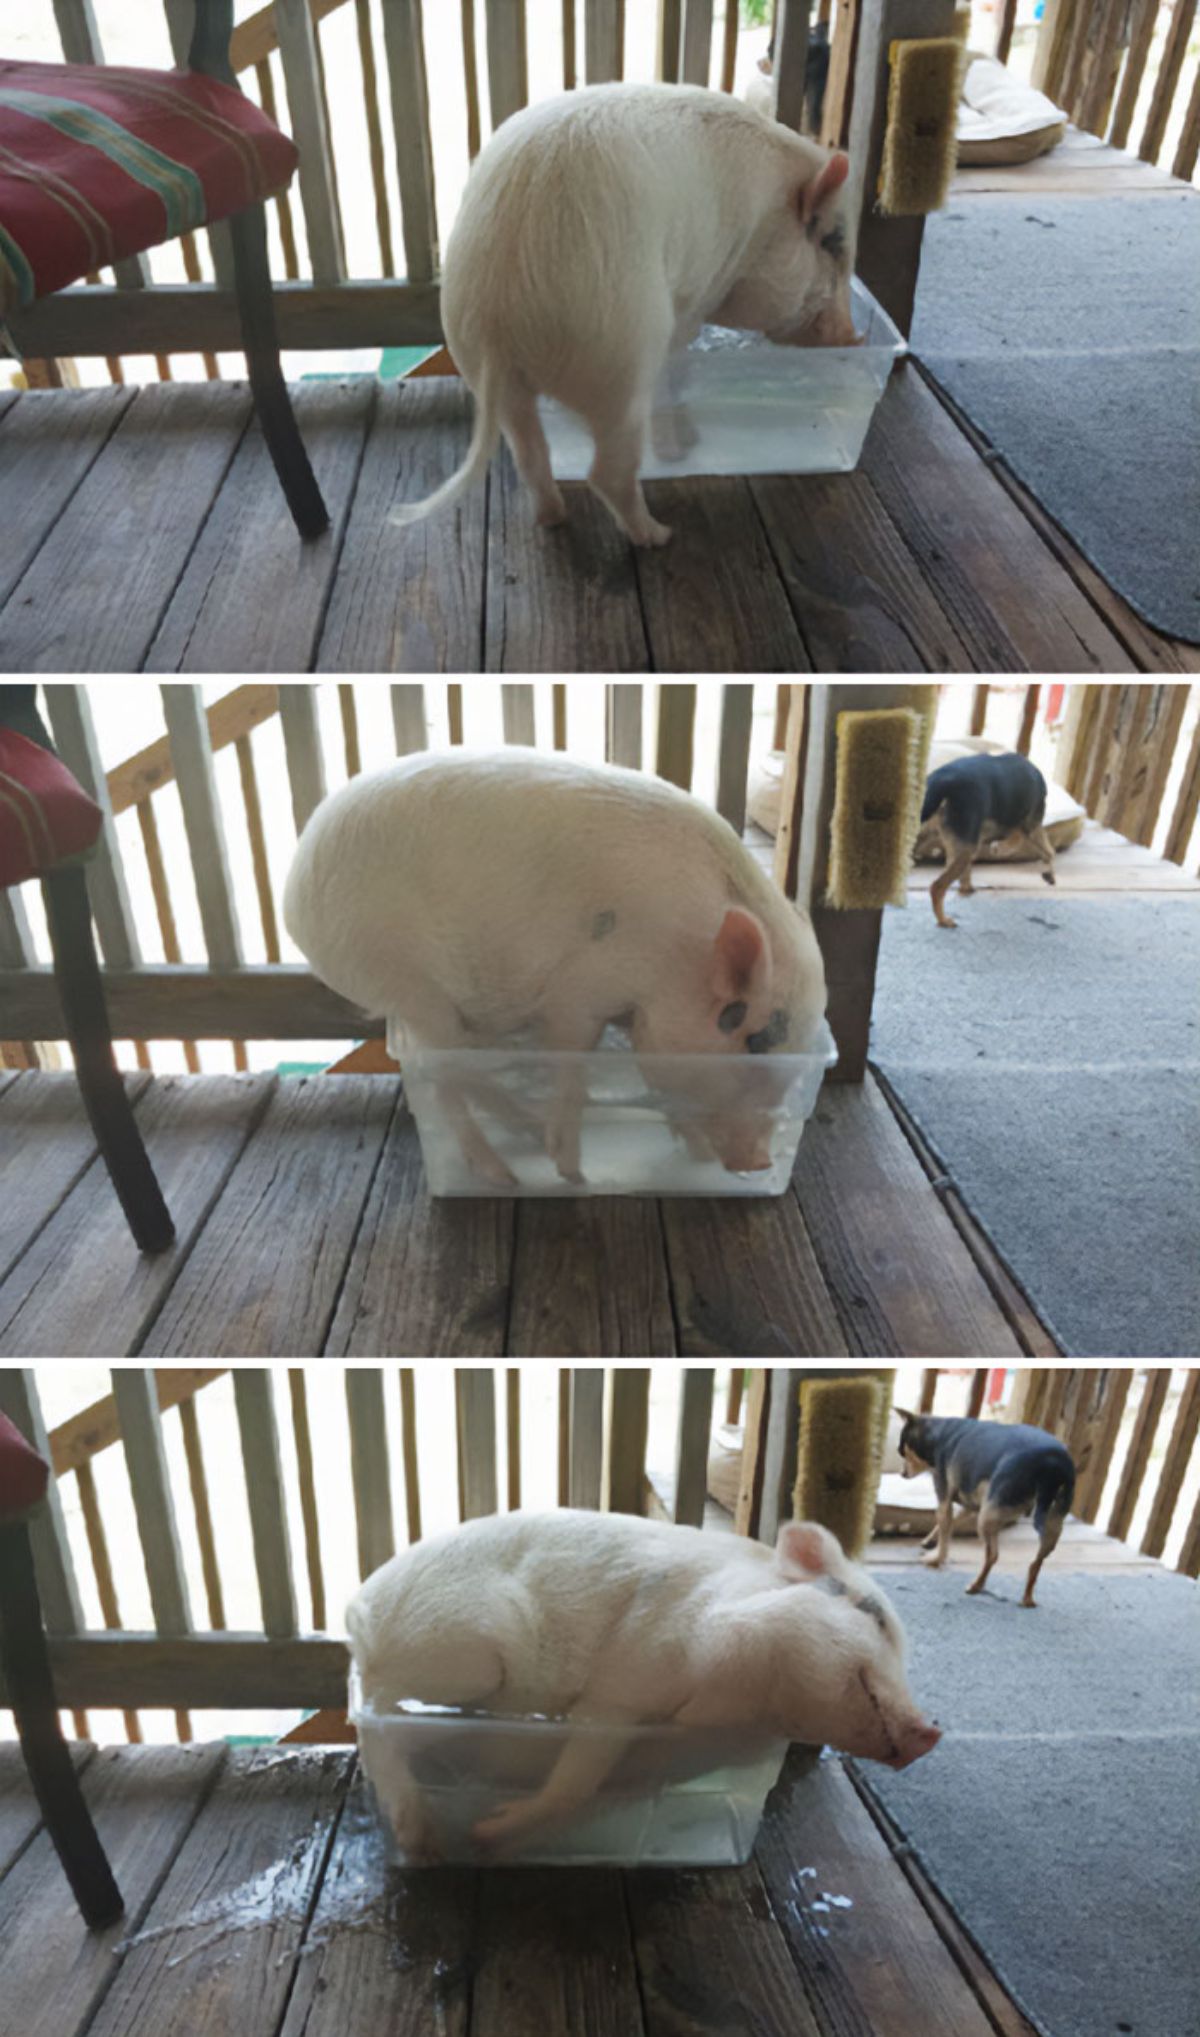 3 photos of a white pig climbing into a transparent white box filled with water